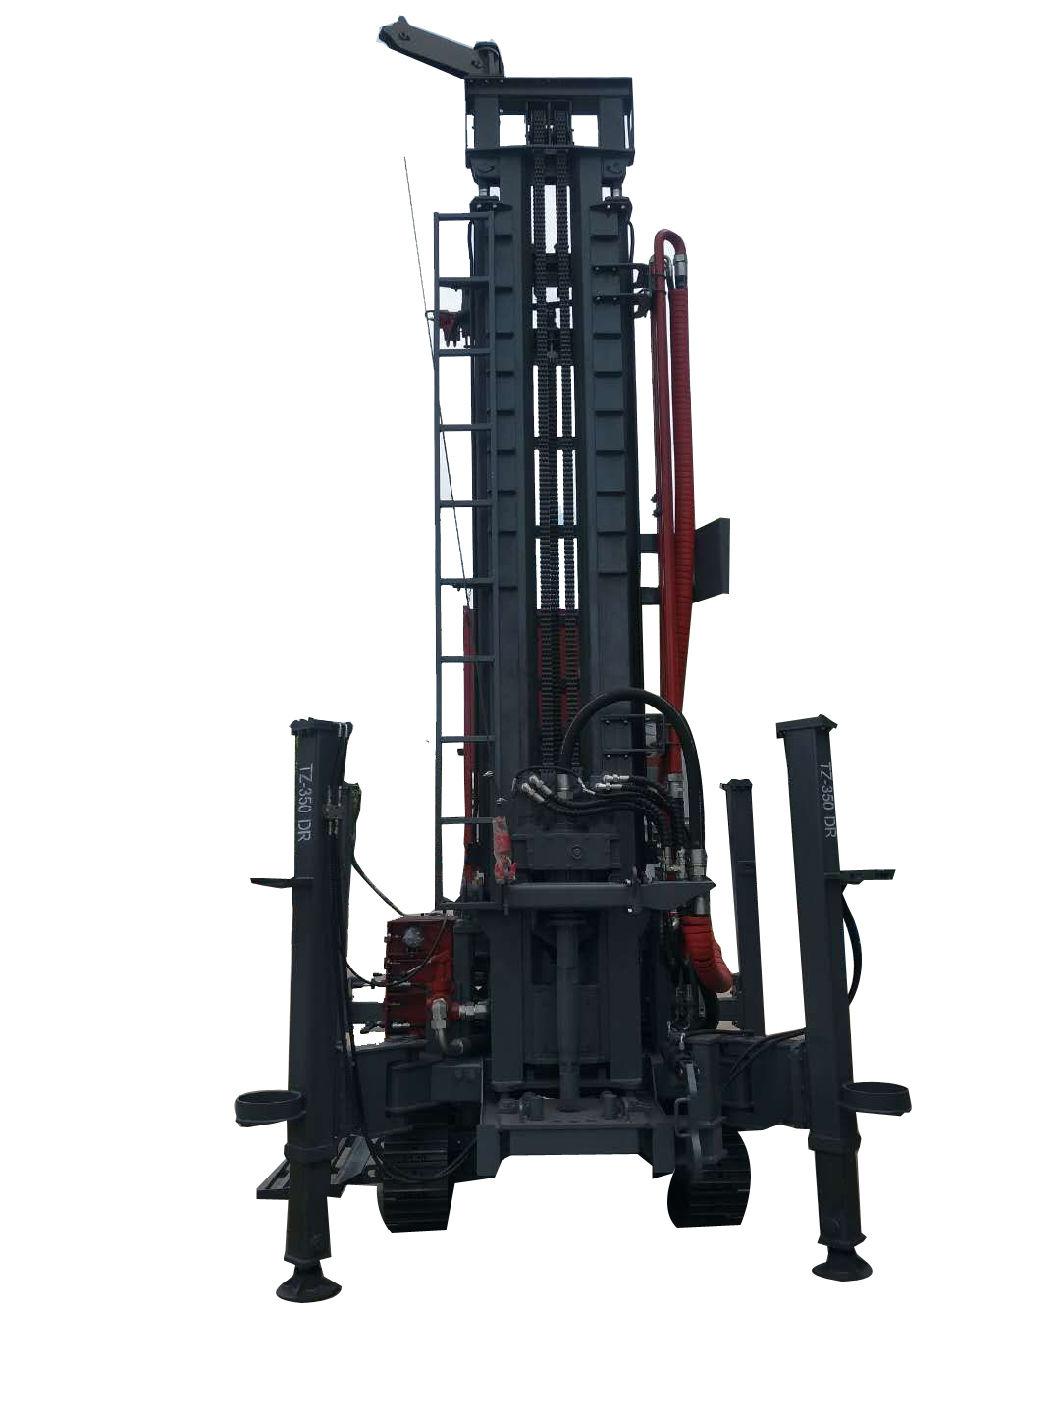 350m Deep Tz-350 Hydraulic Top Drive Water Well Drilling Rig